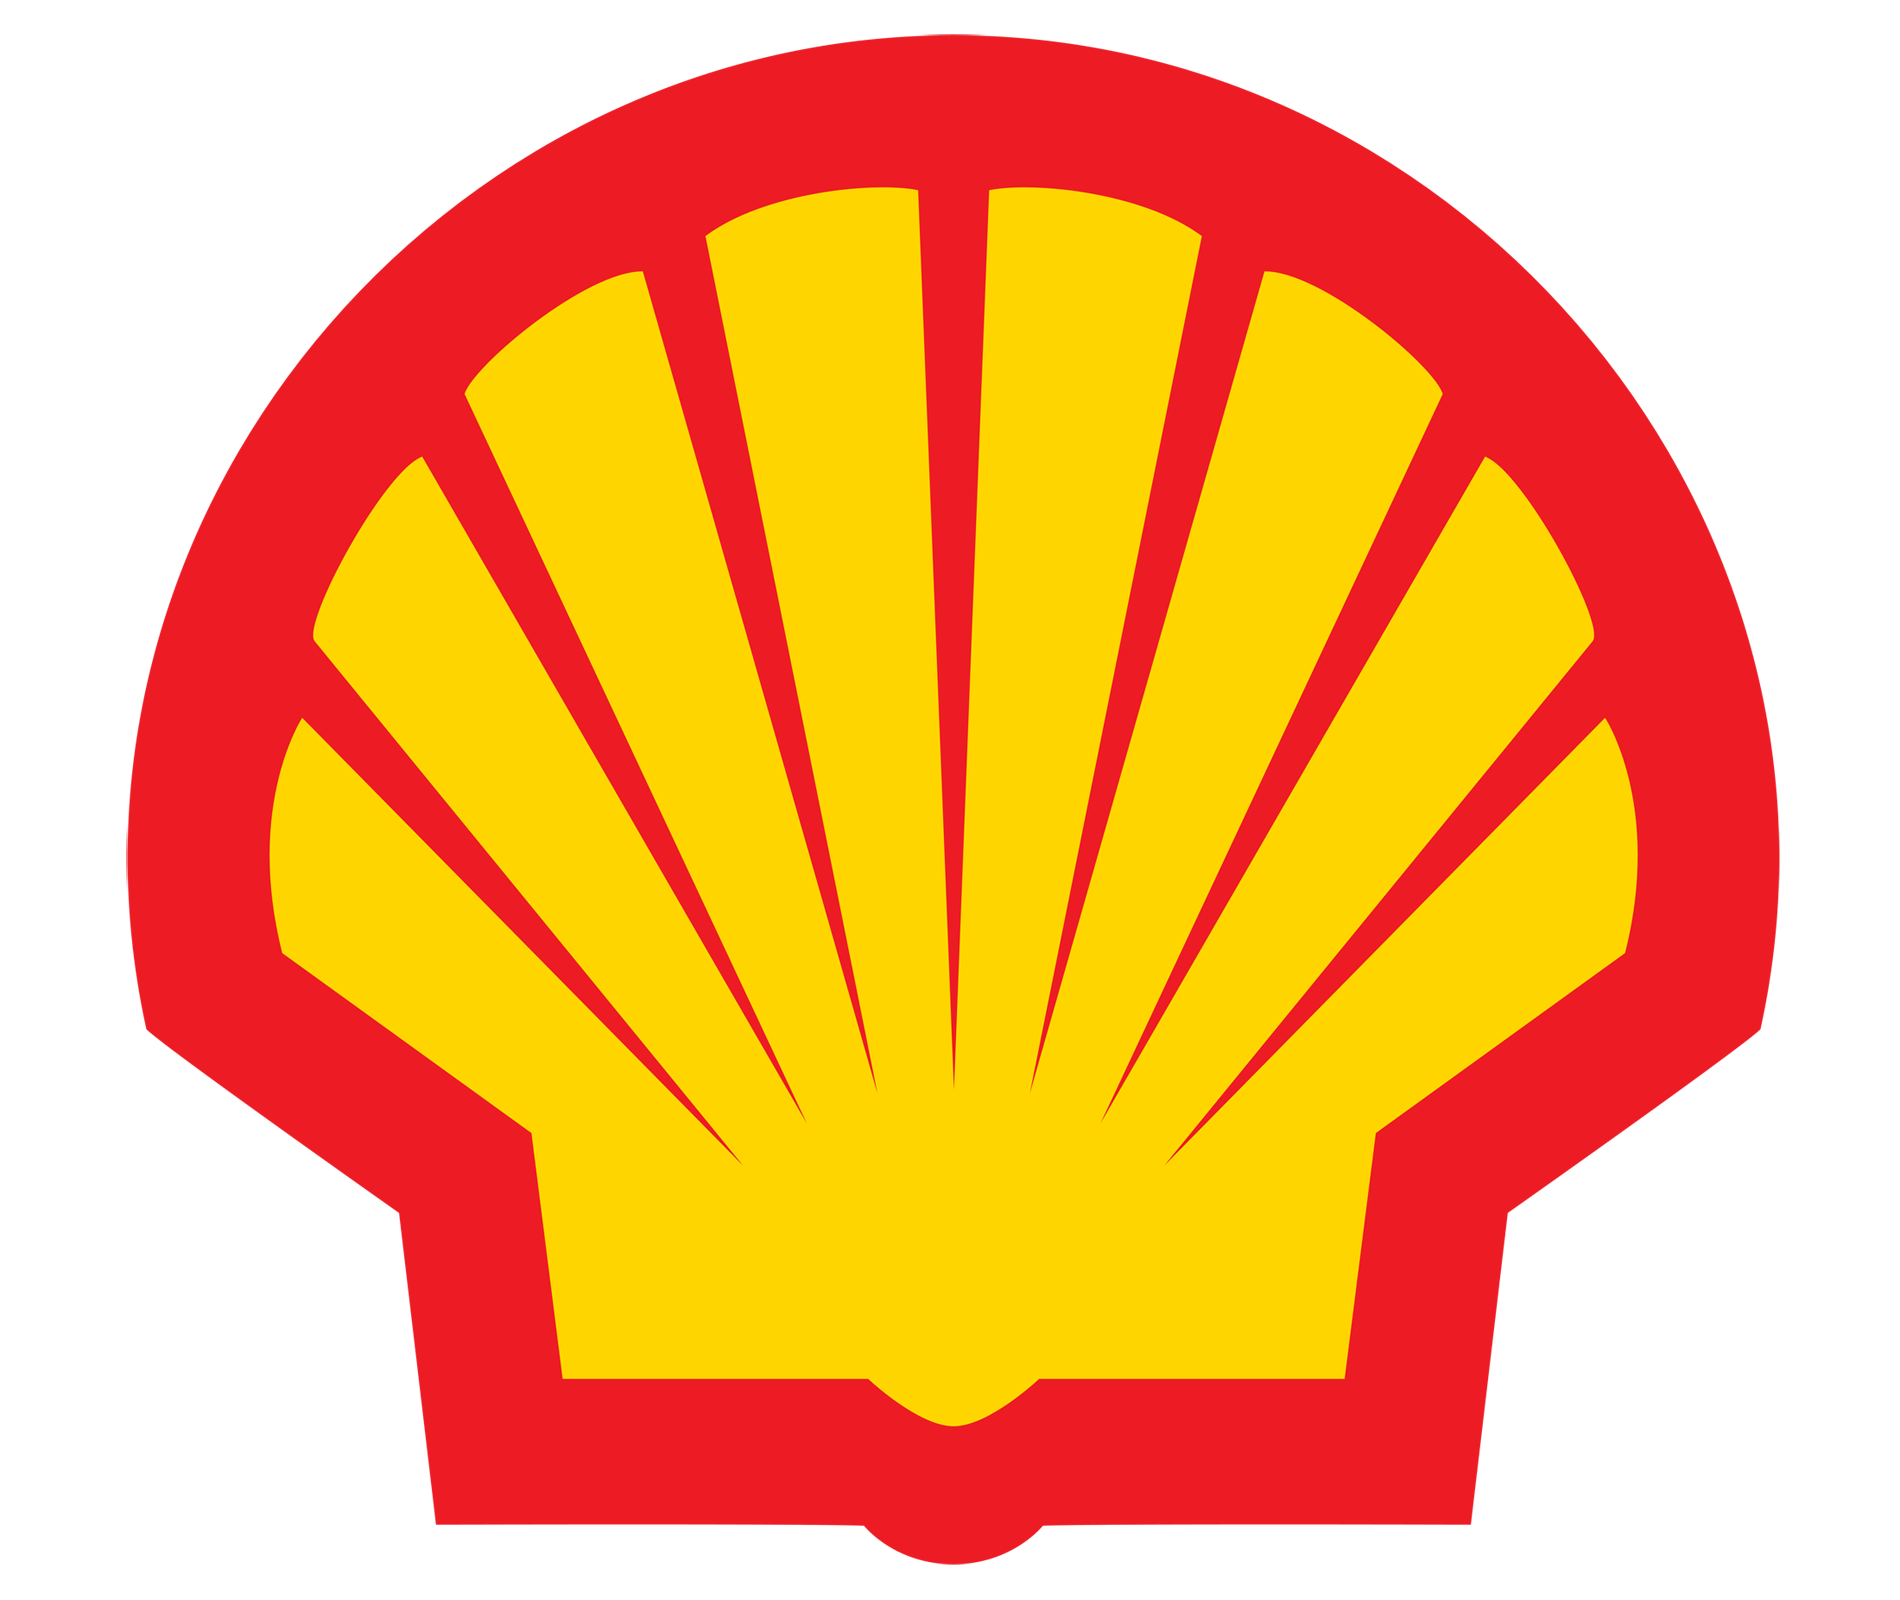 shell-logo-shell-symbol-meaning-history-and-evolution